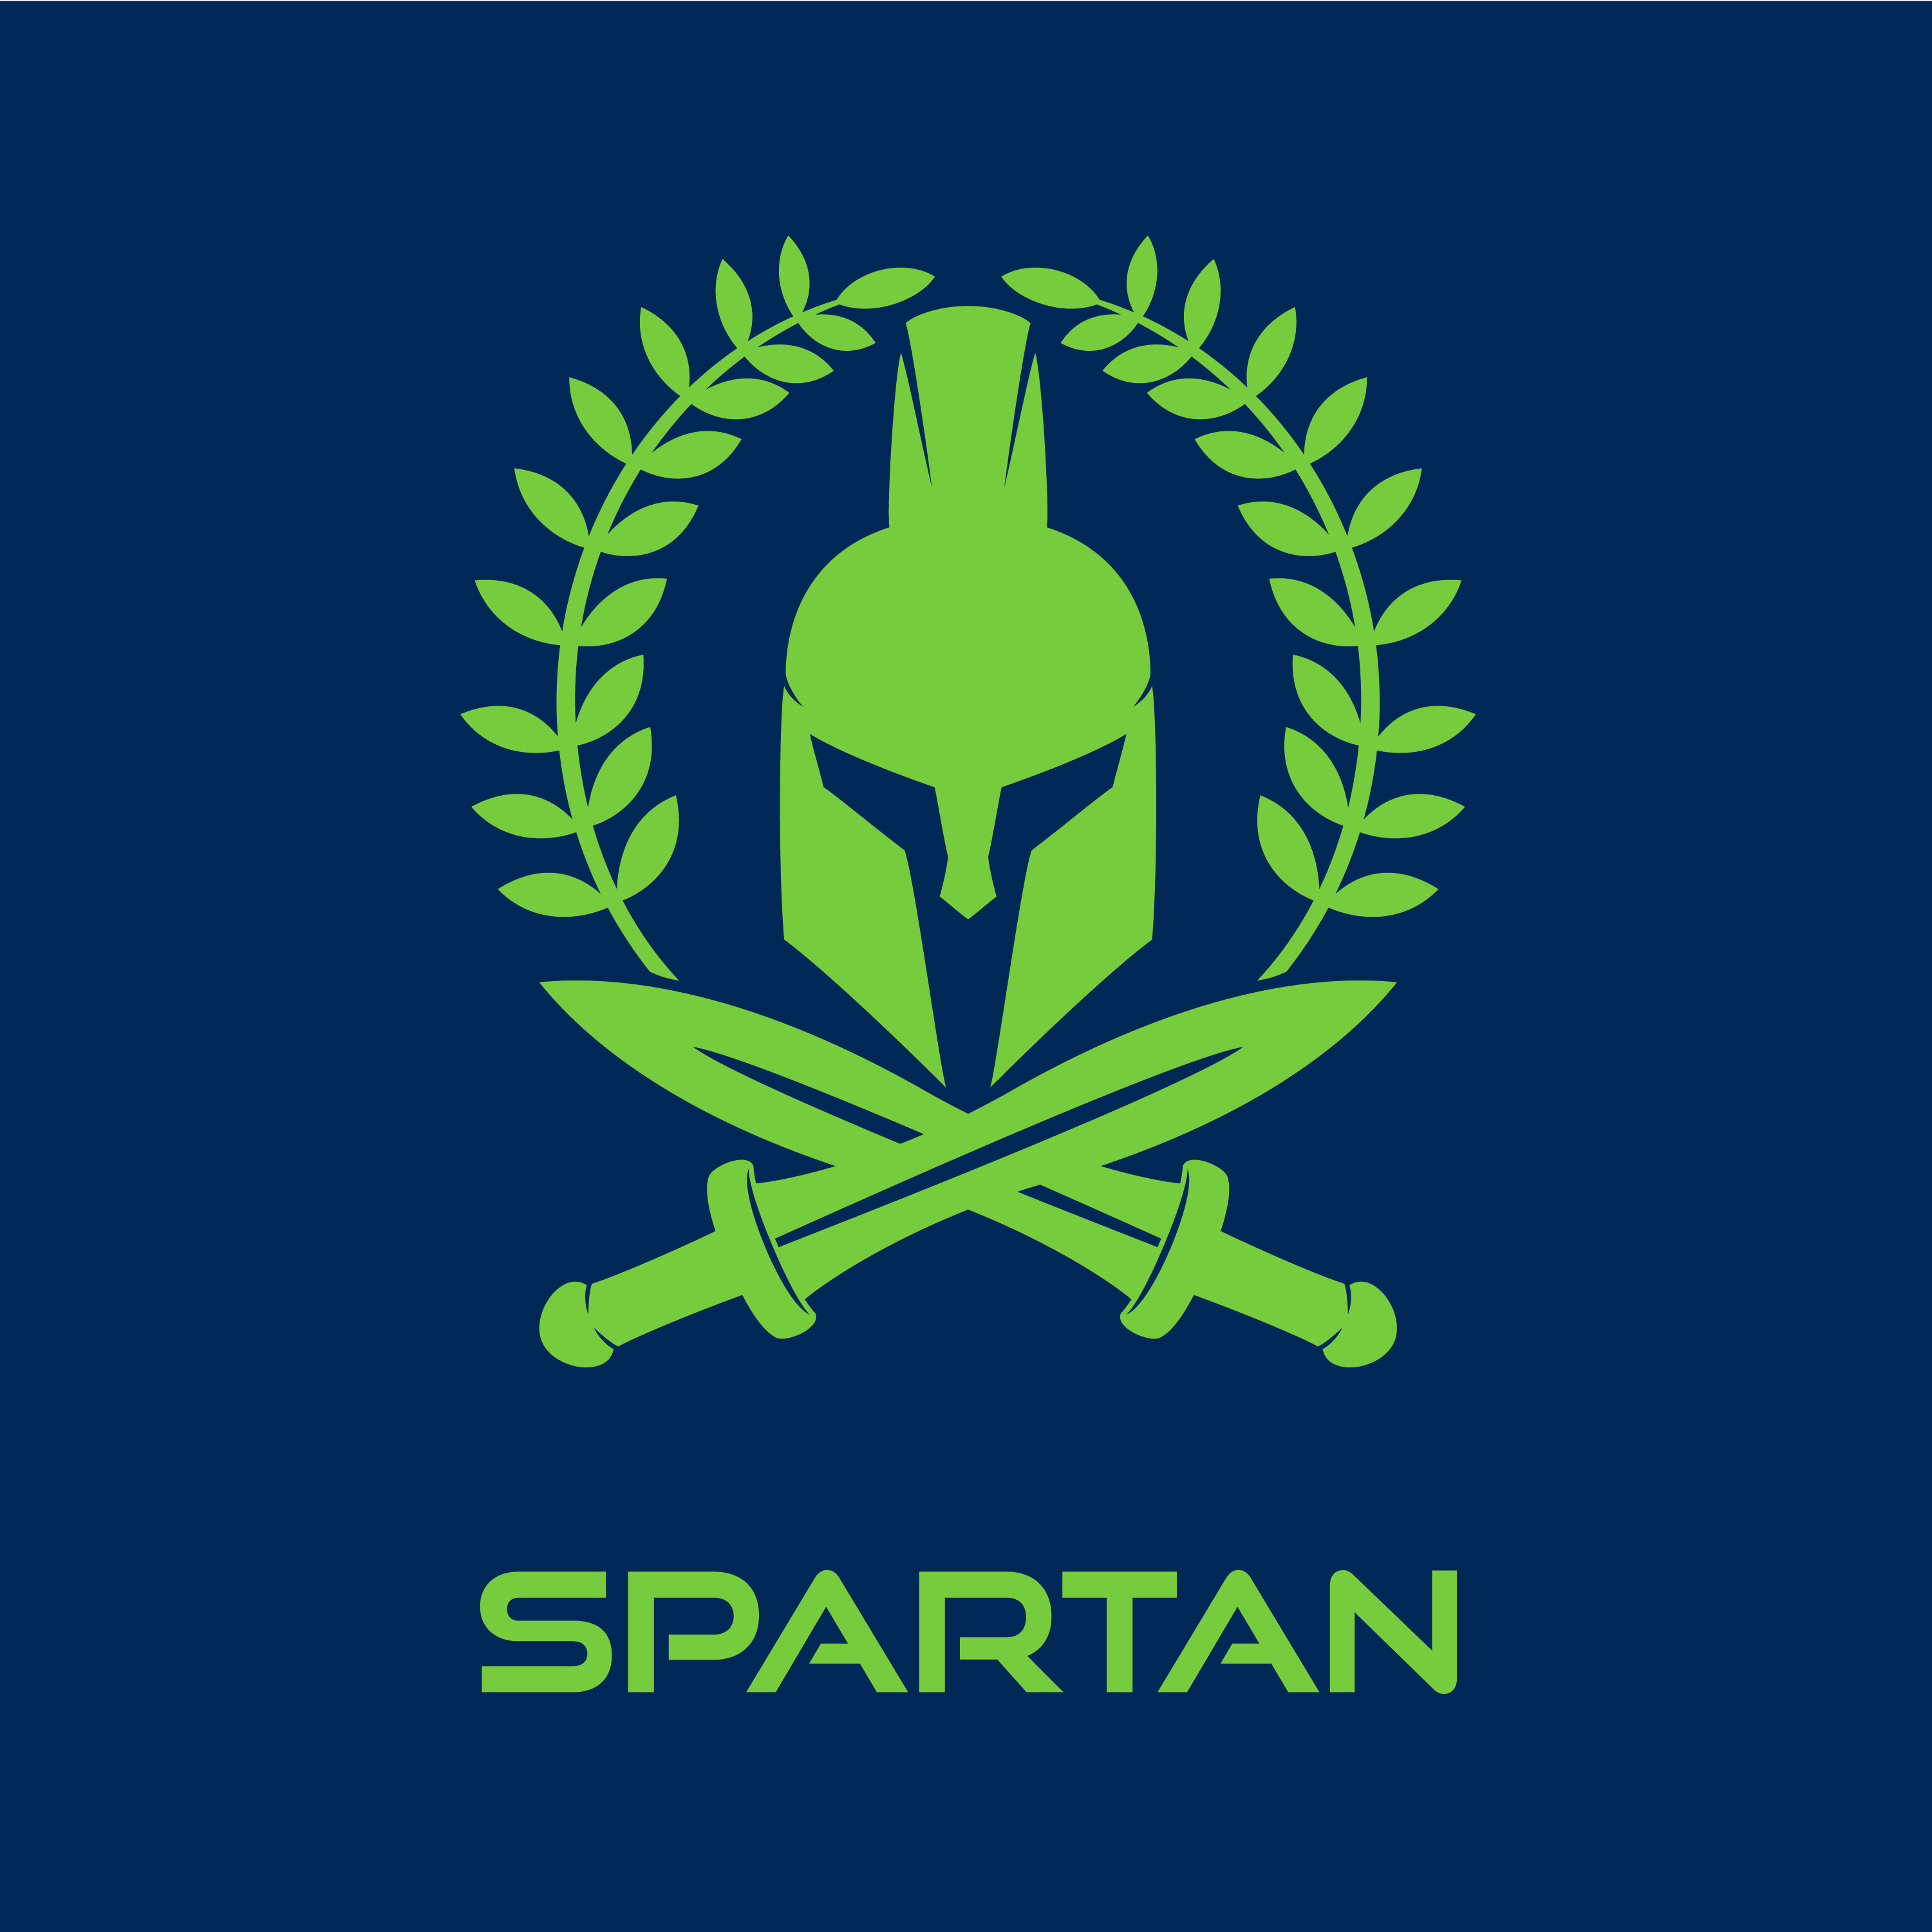 Club Image for SPARTAN